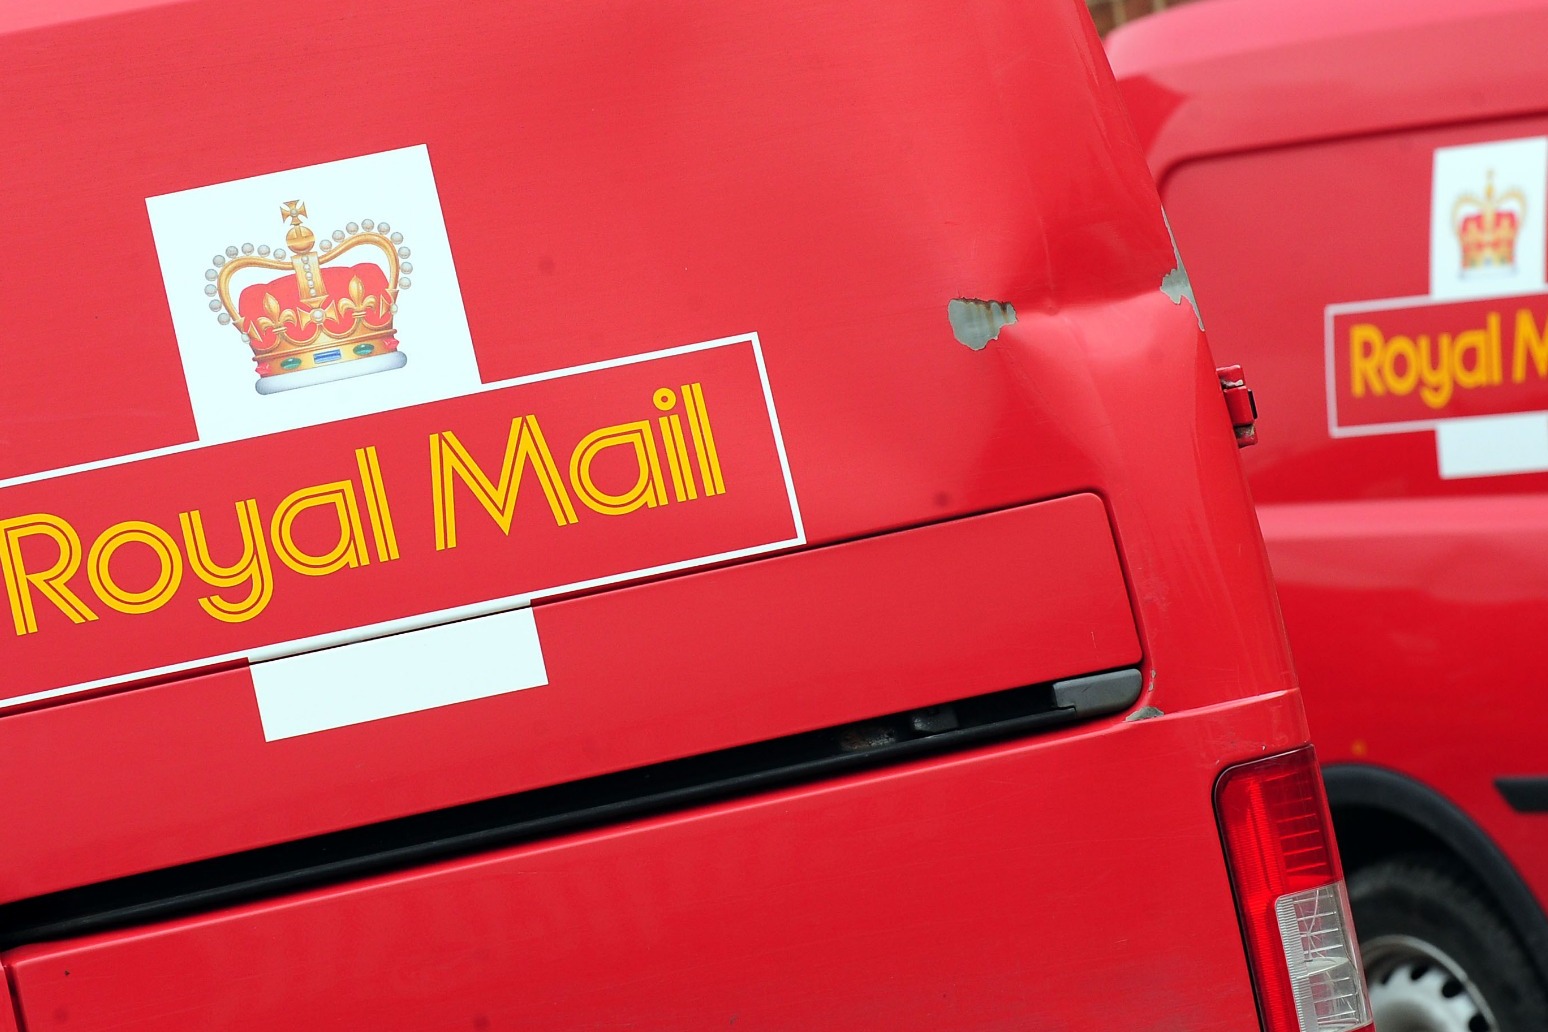 Royal Mail group faces ‘no further action’ over potential security probe 